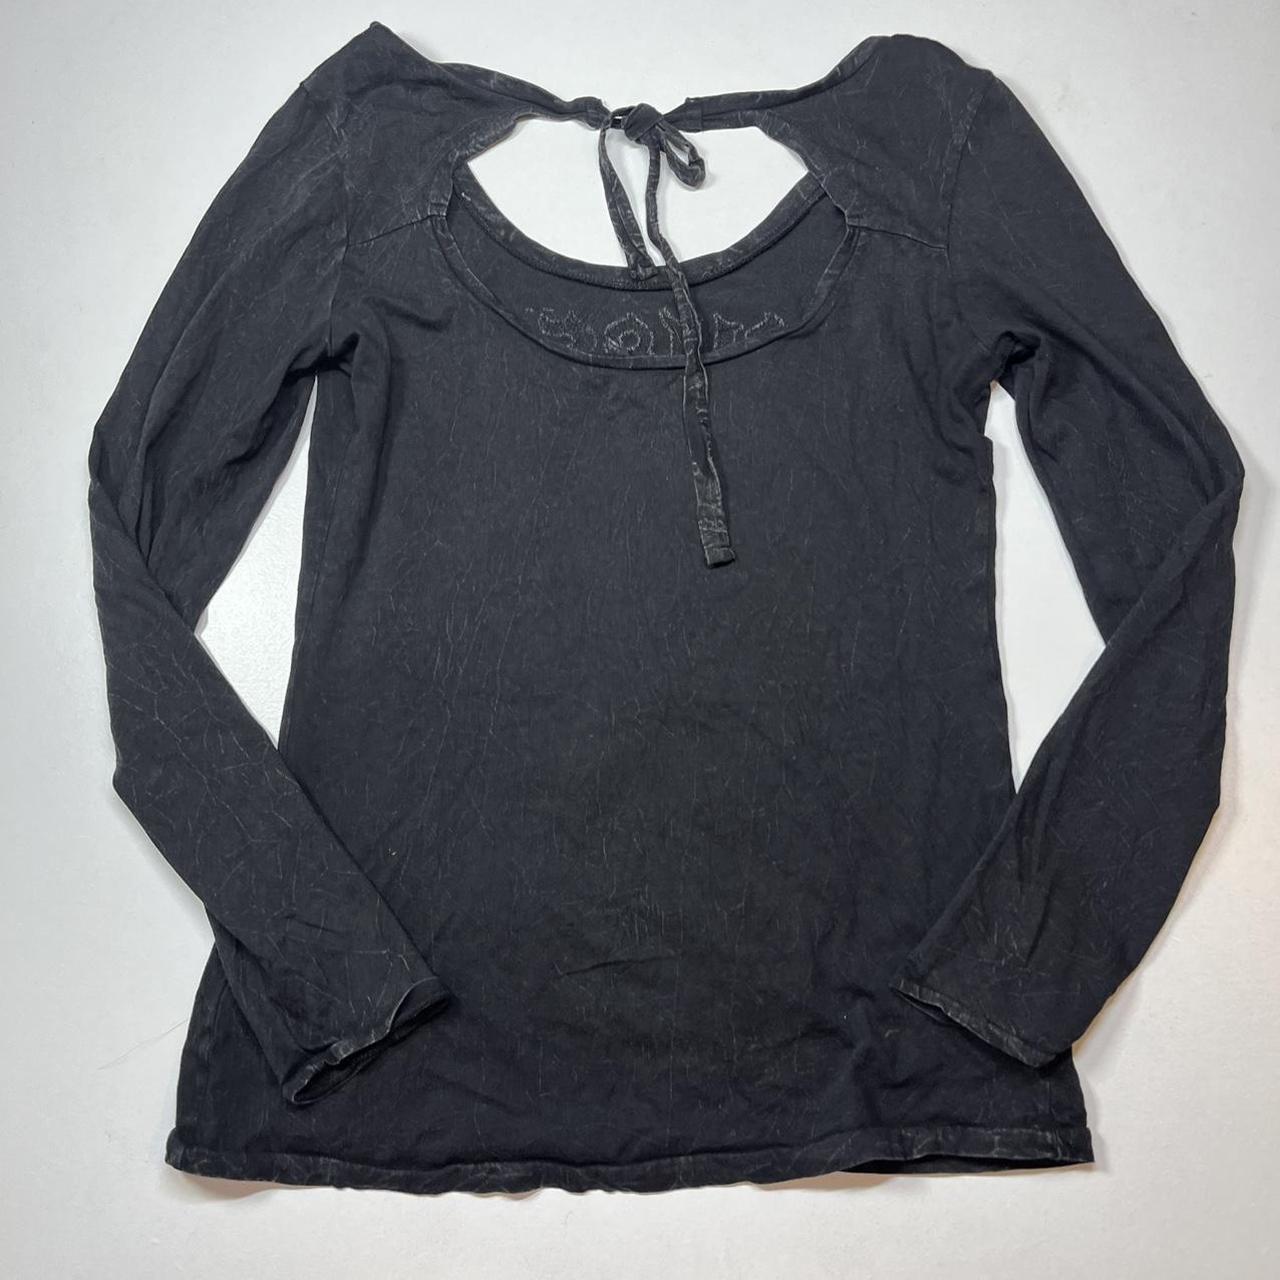 Guess Women's Black and Grey T-shirt (3)